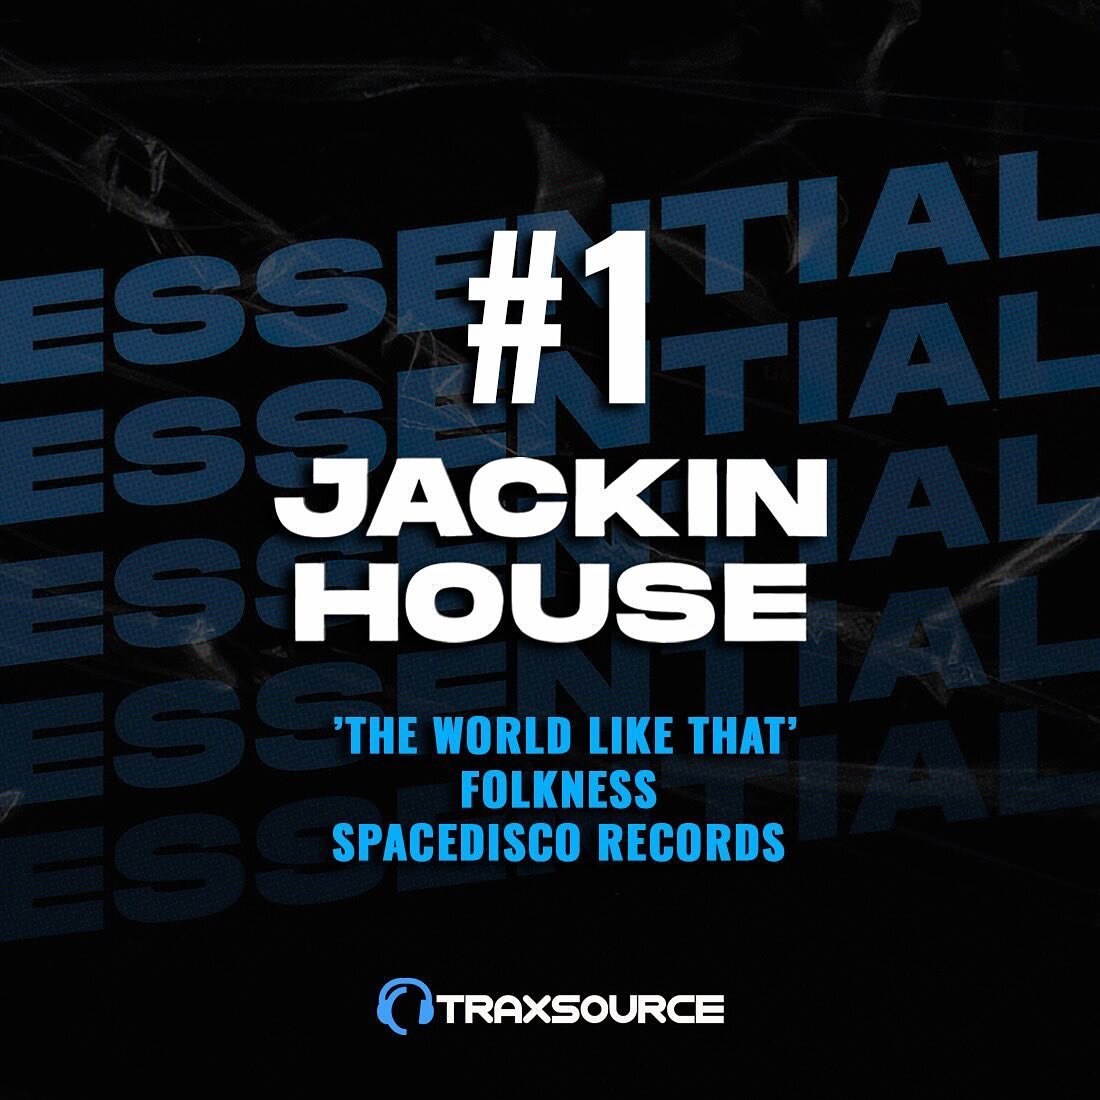 The #1 Essential Jackin House track right now at @traxsource is &quot;The World Like That&quot; by @folknessofficial on @spacediscorecords 🙏❤️🌎 Be sure to grab a download from Traxsource! #JackinHouse #Spacedisco